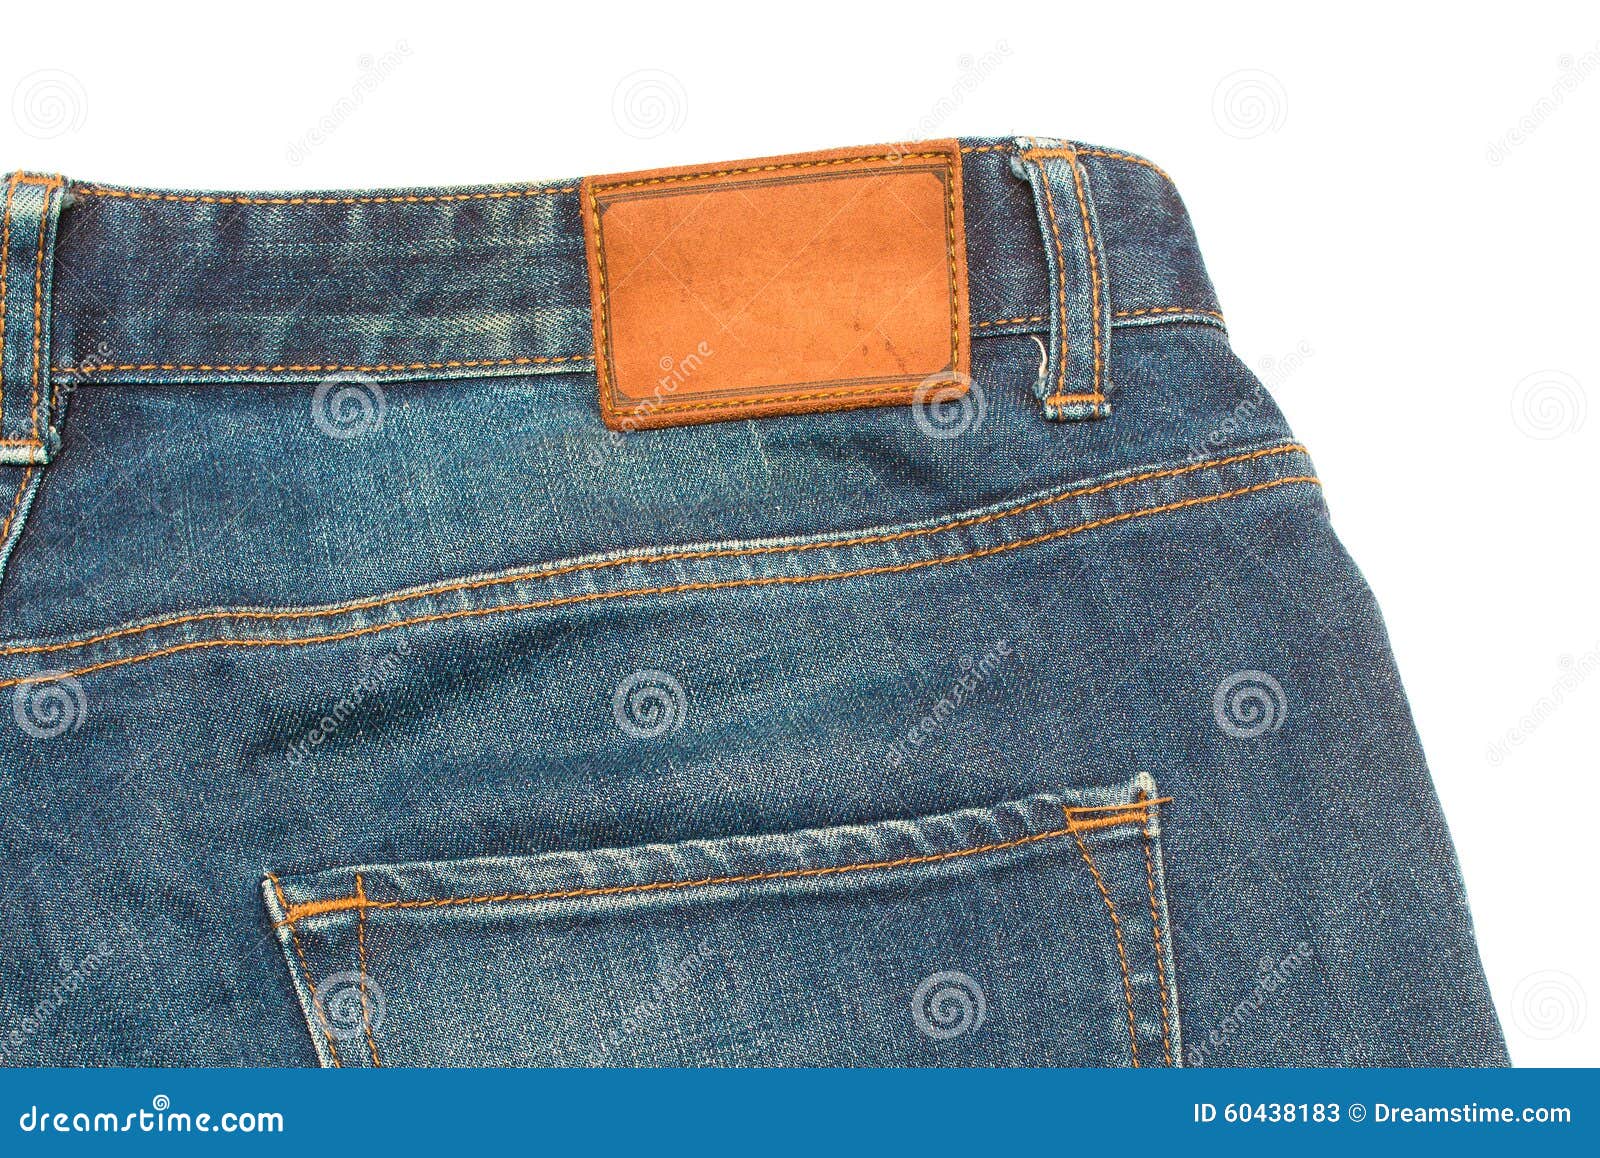 Logo on jeans stock image. Image of business, classic - 60438183